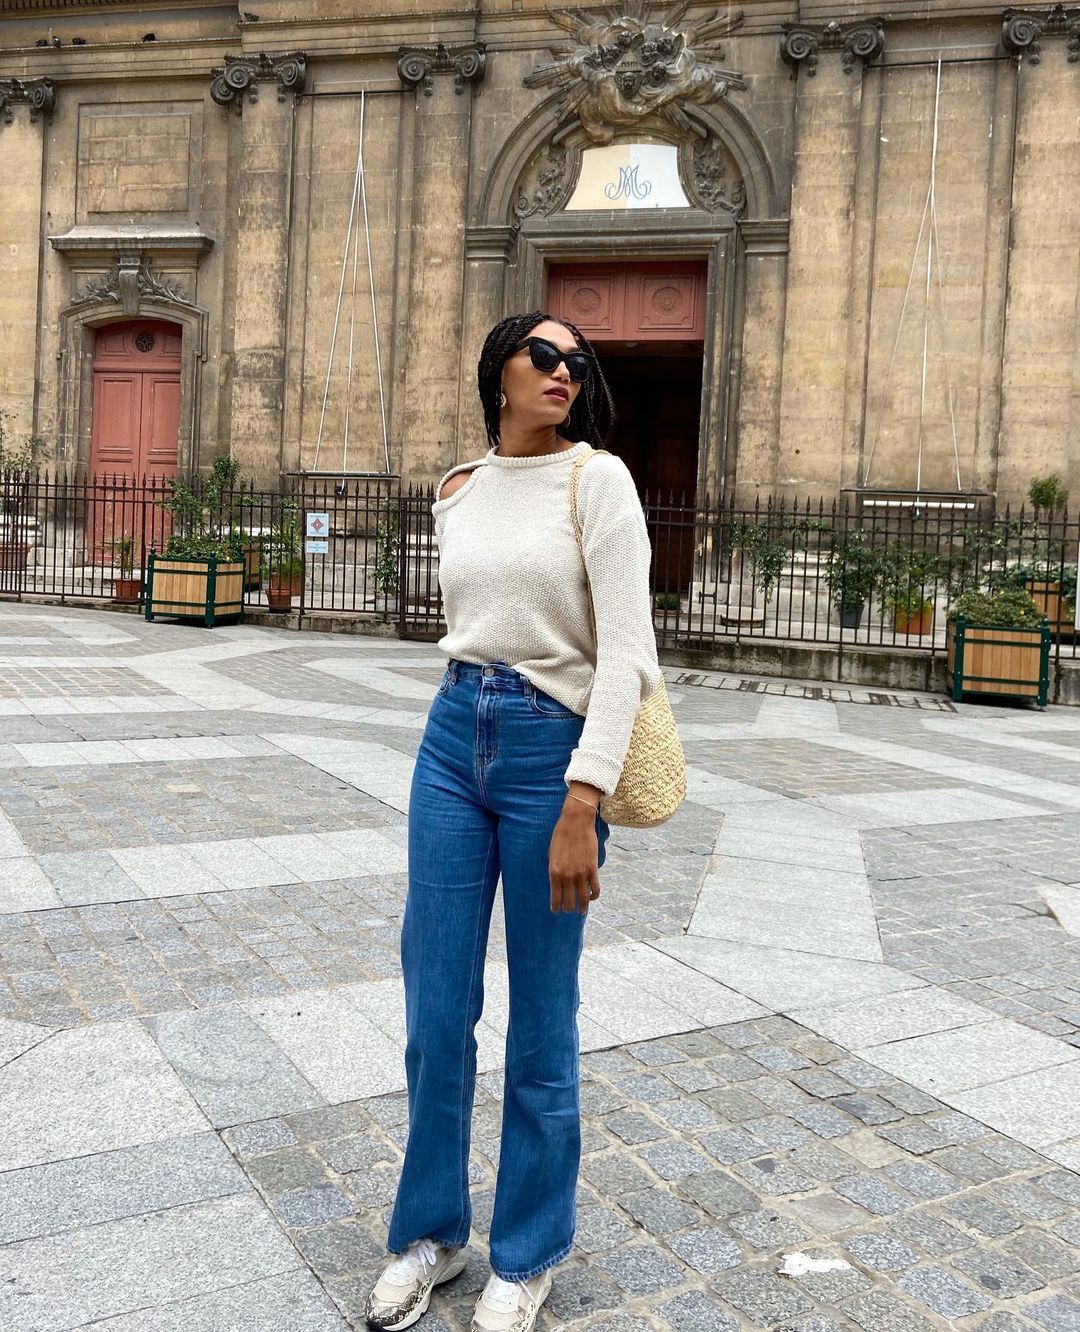 The 5 Best Shoes to Wear With Flare Jeans and Bell Bottoms | Who What Wear